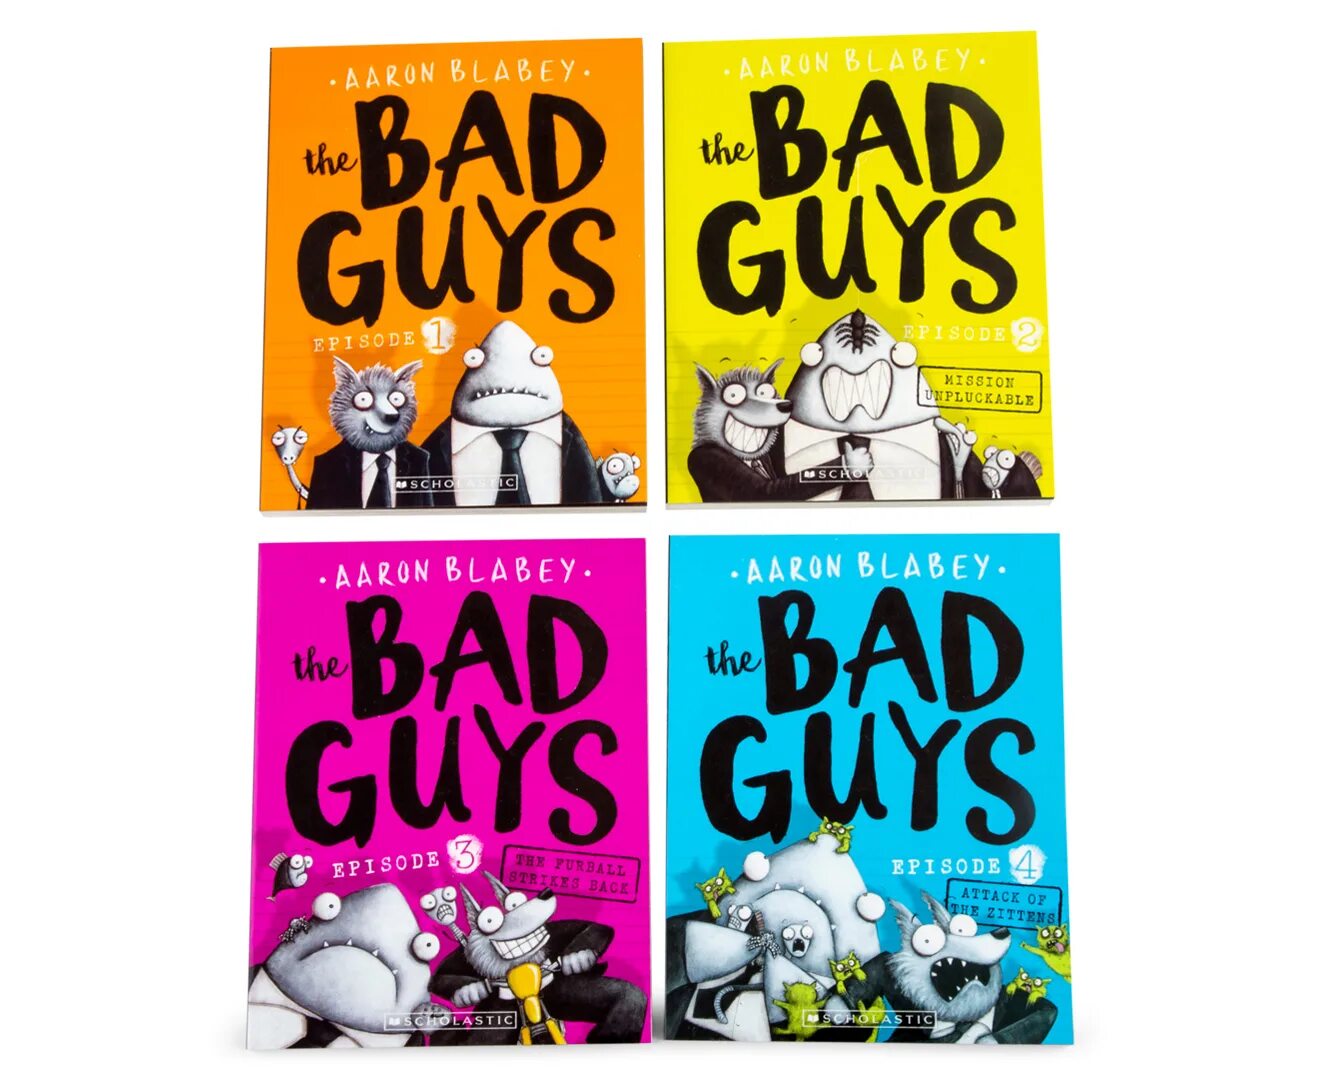 This is book it s my book. The Bad guys Aaron Blabey. Bad guys книга. Bad книга. The Bad guys (book Series).